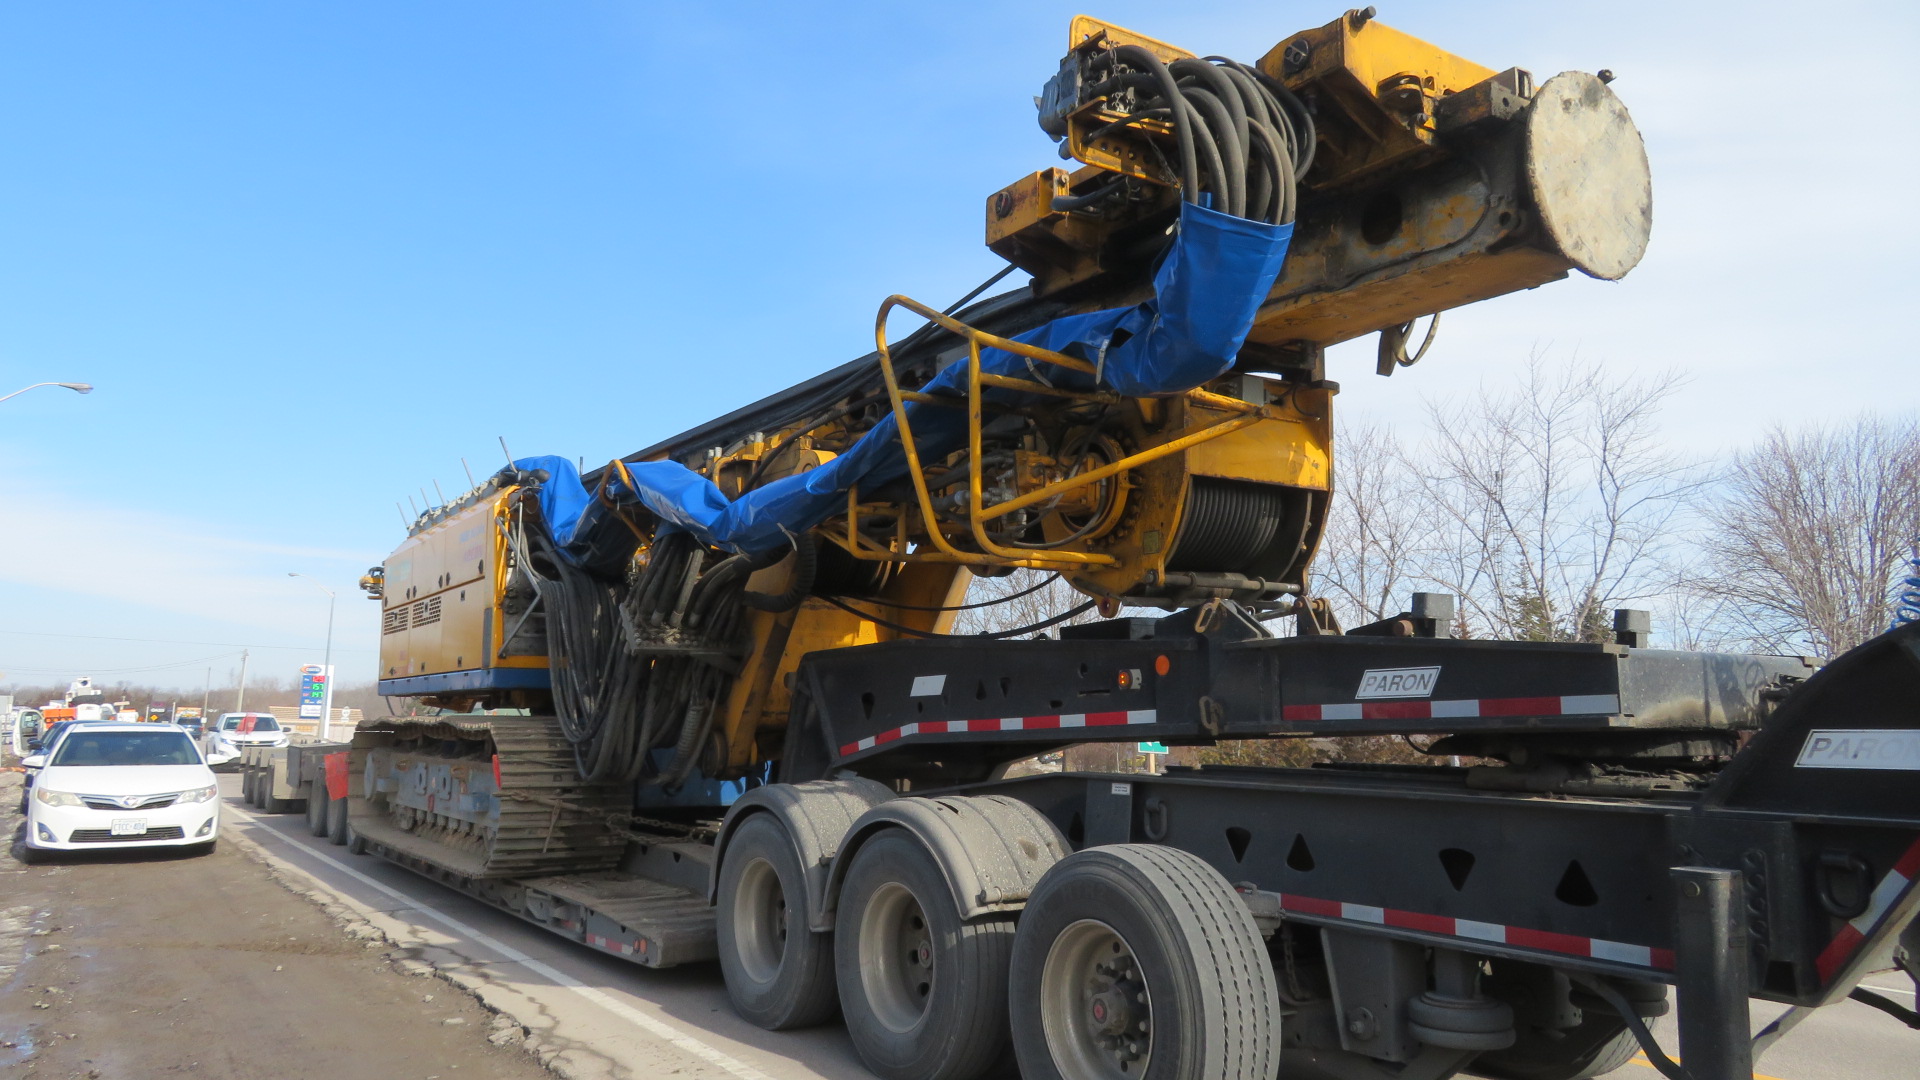 Drill being delivered for caisson liner installation